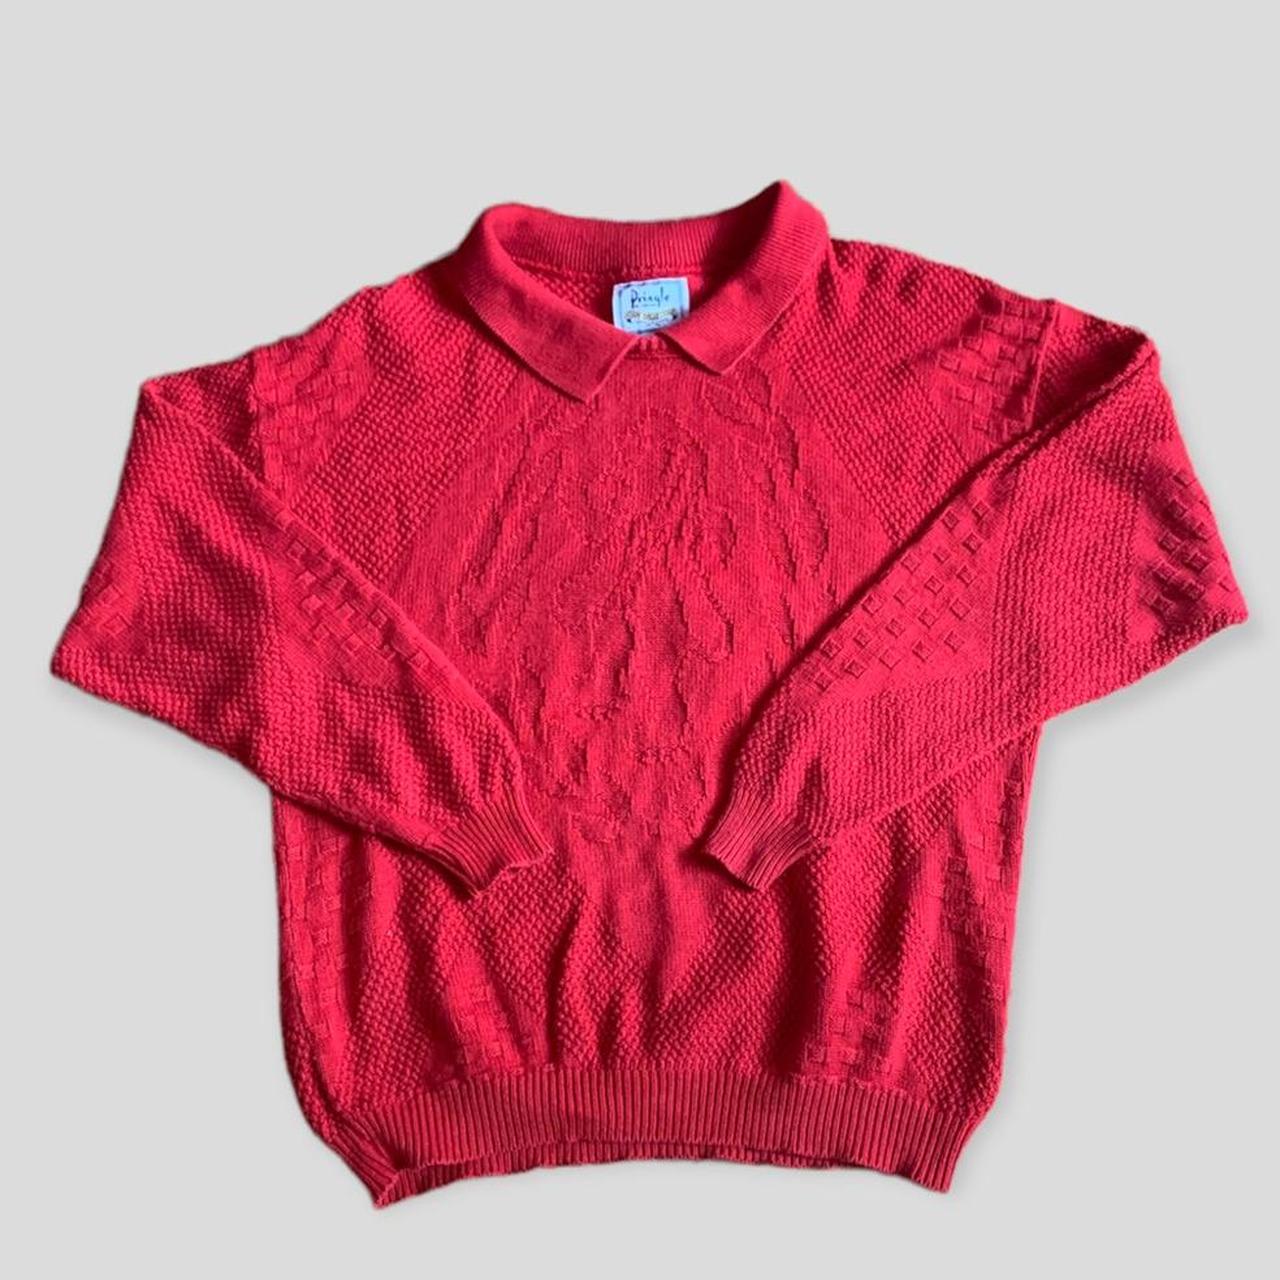 Product Image 1 - Vintage red sweater. Red knit